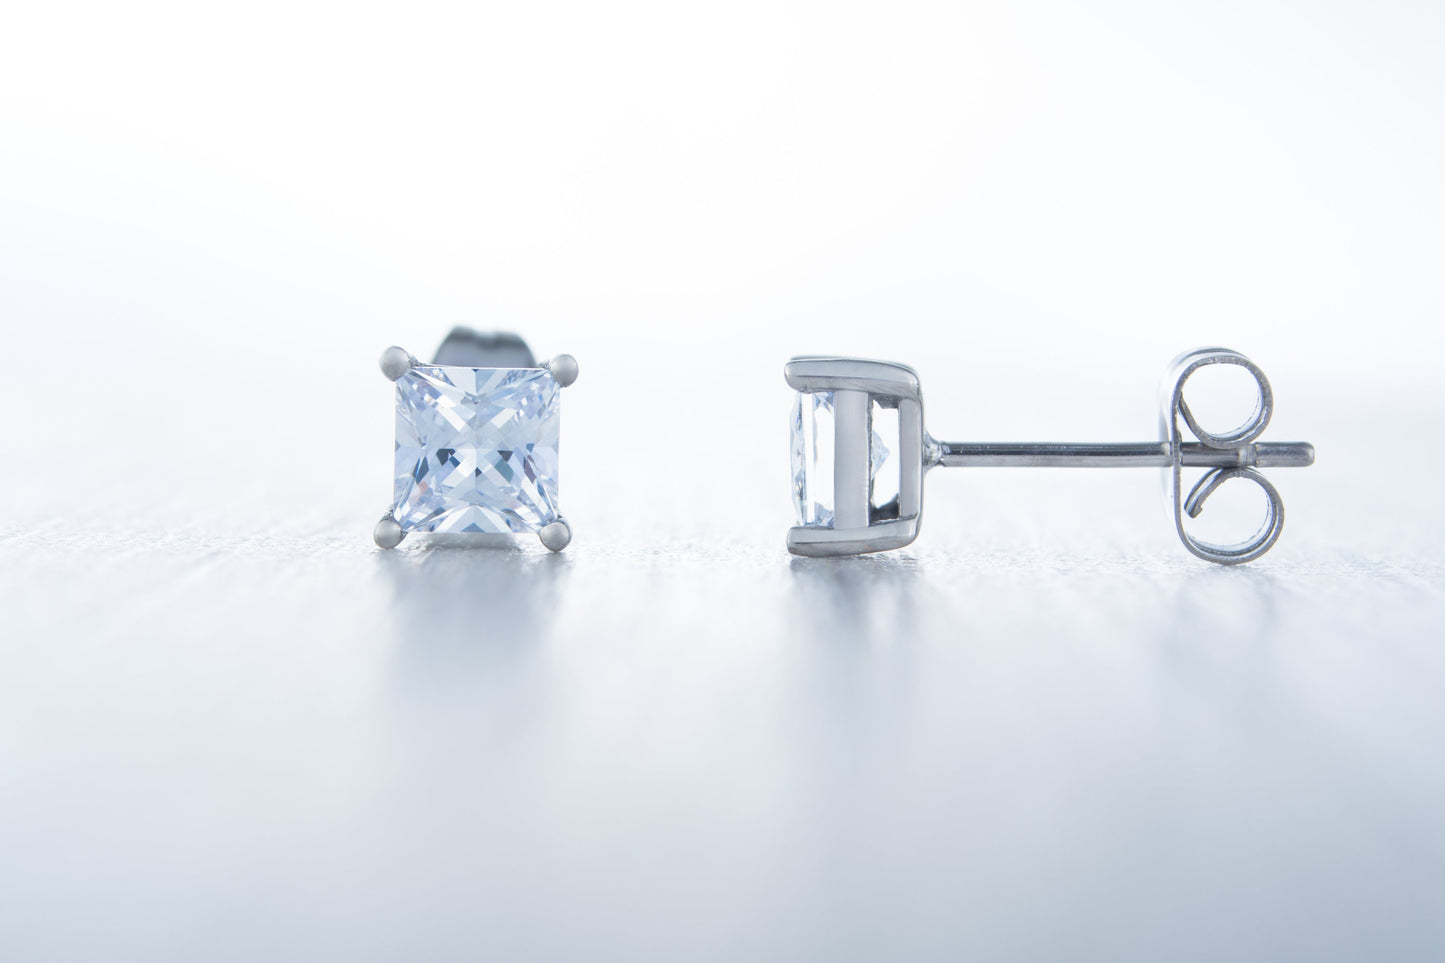 Man Made Diamond Simulant stud earrings, available in titanium, white gold and surgical steel 3mm, 4mm & 5mm sizes